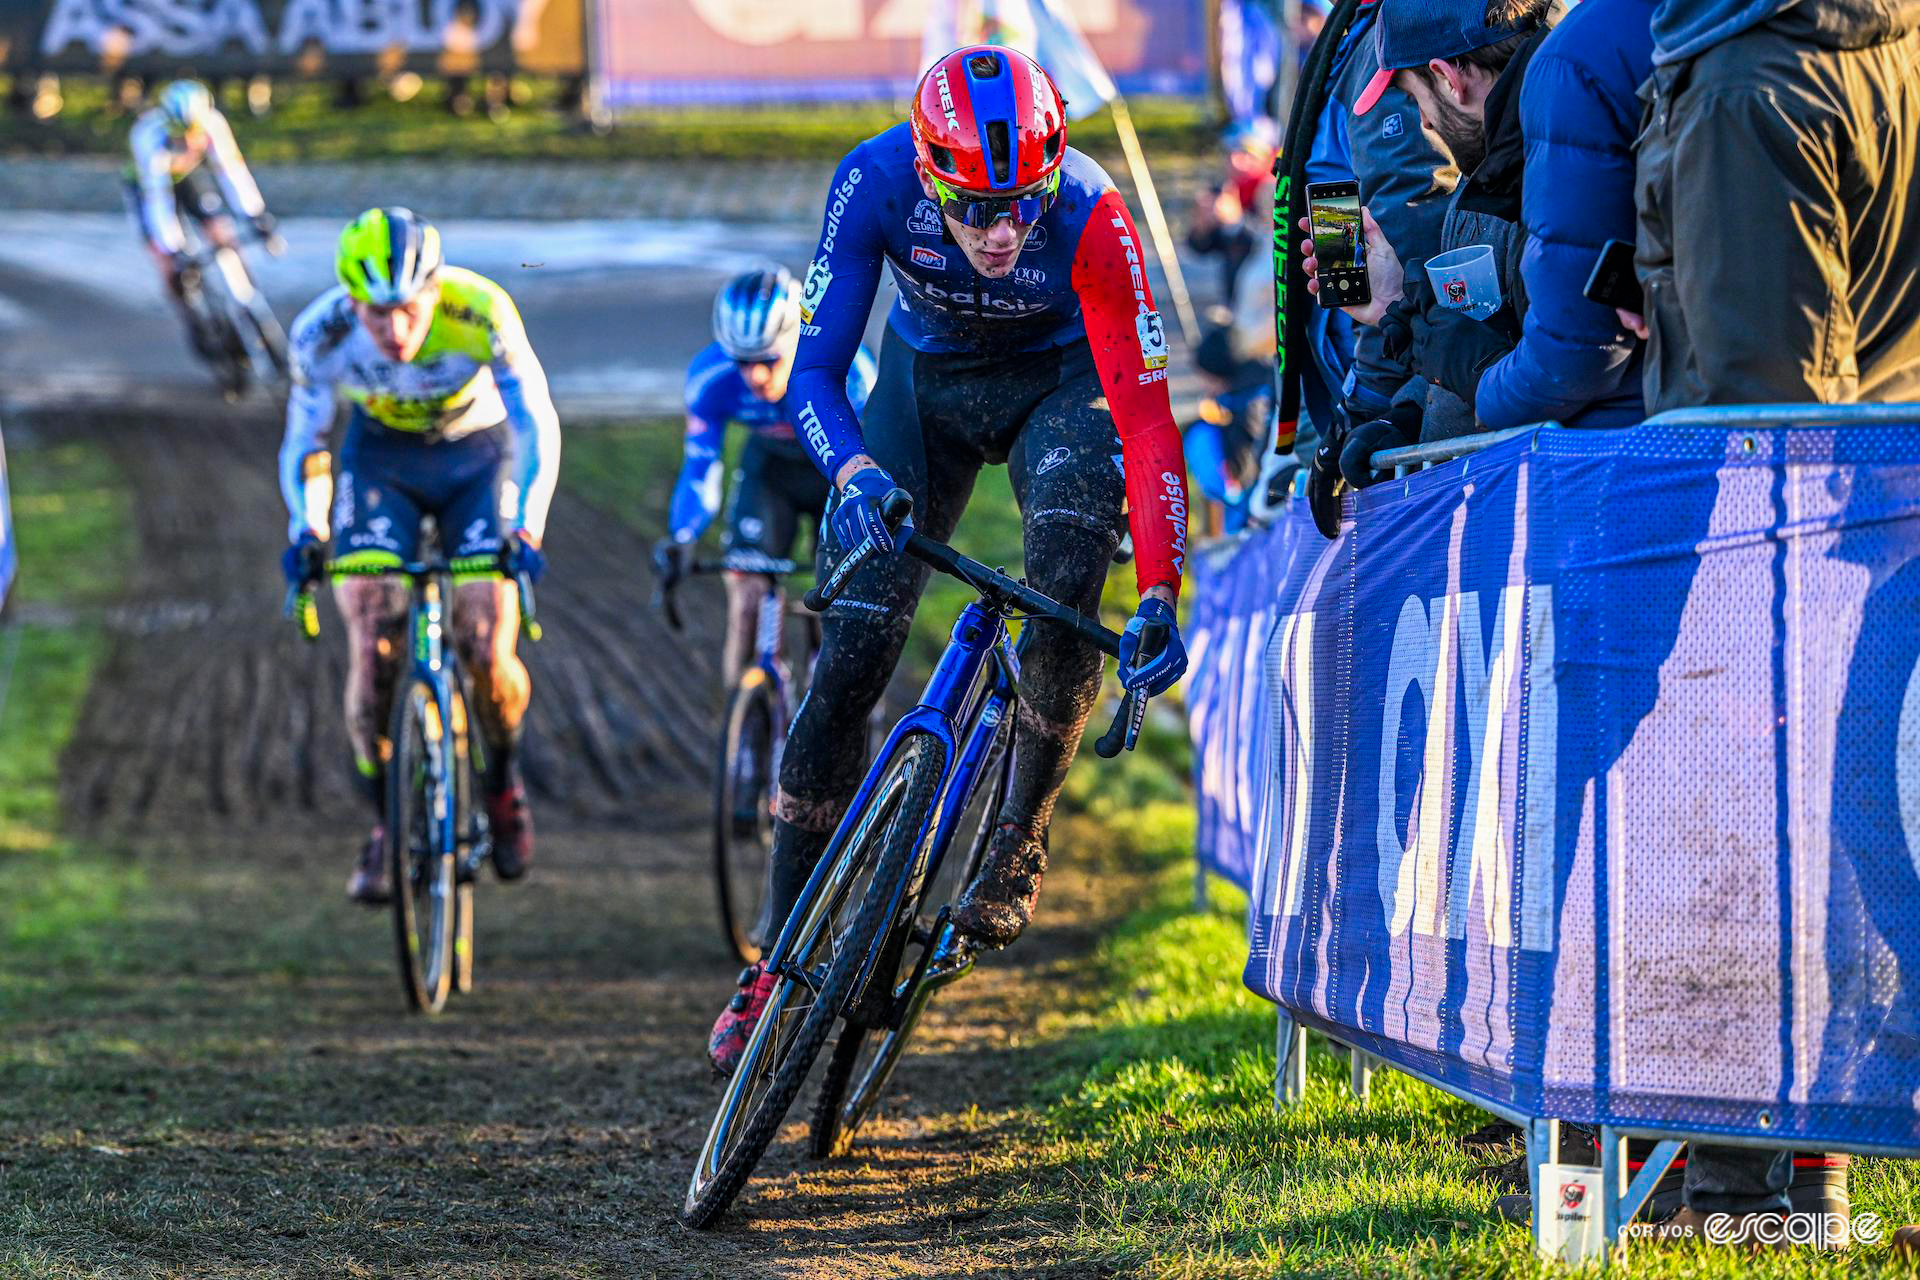 Well wrapped up against the cold, Thibau Nys leans into a corner as he sprints away from his rivals during Cyclocross Superprestige Boom.